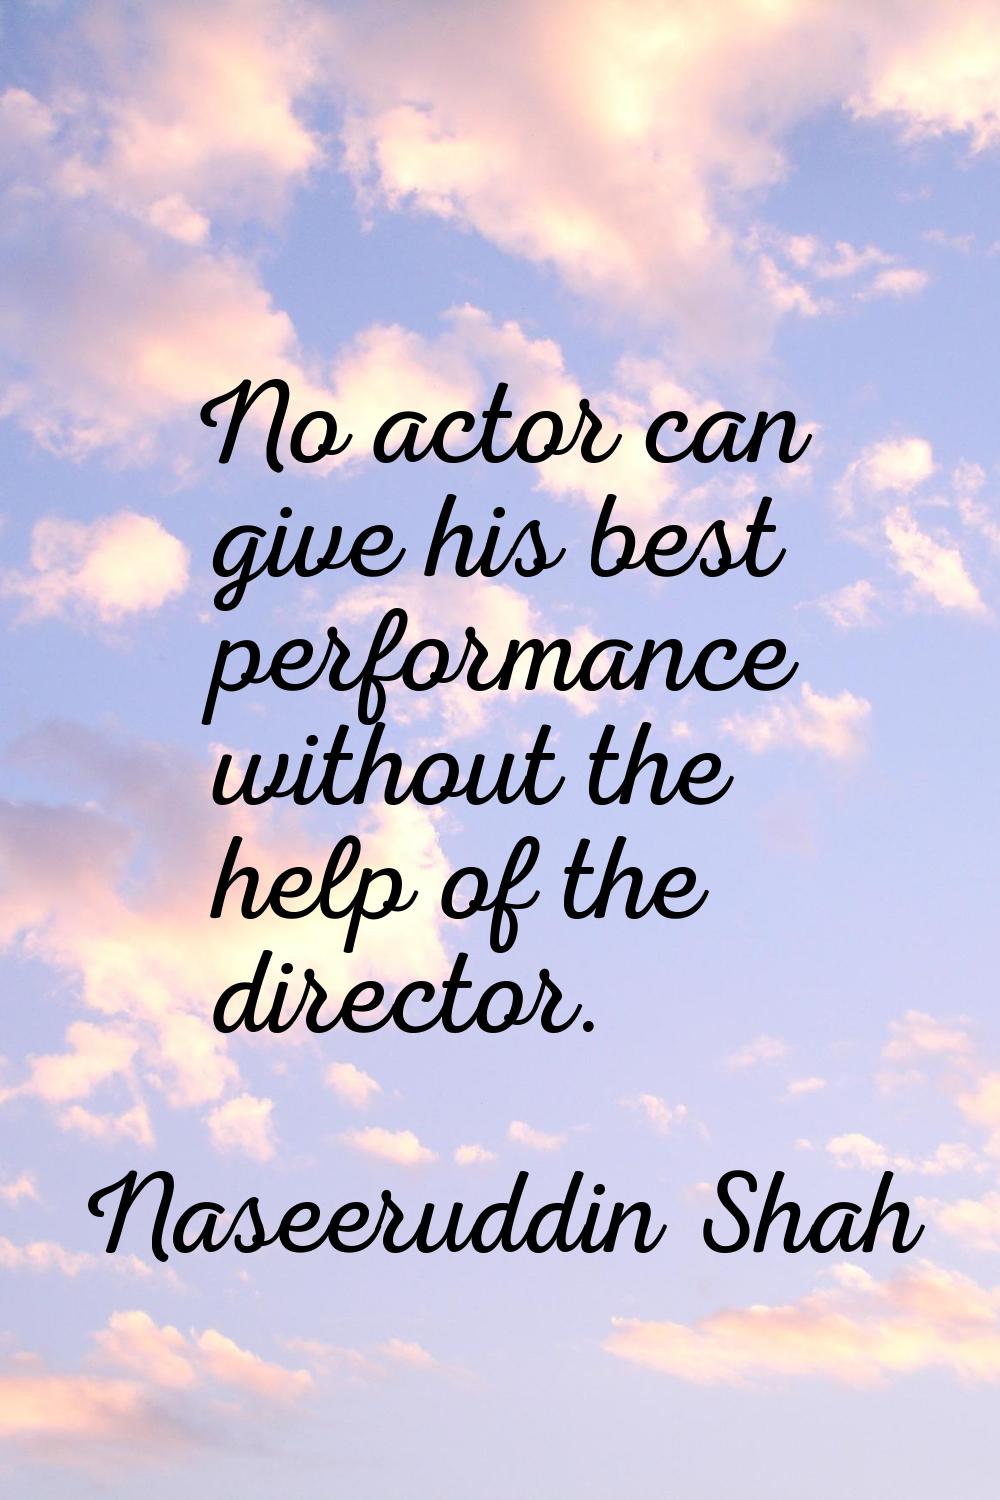 No actor can give his best performance without the help of the director.